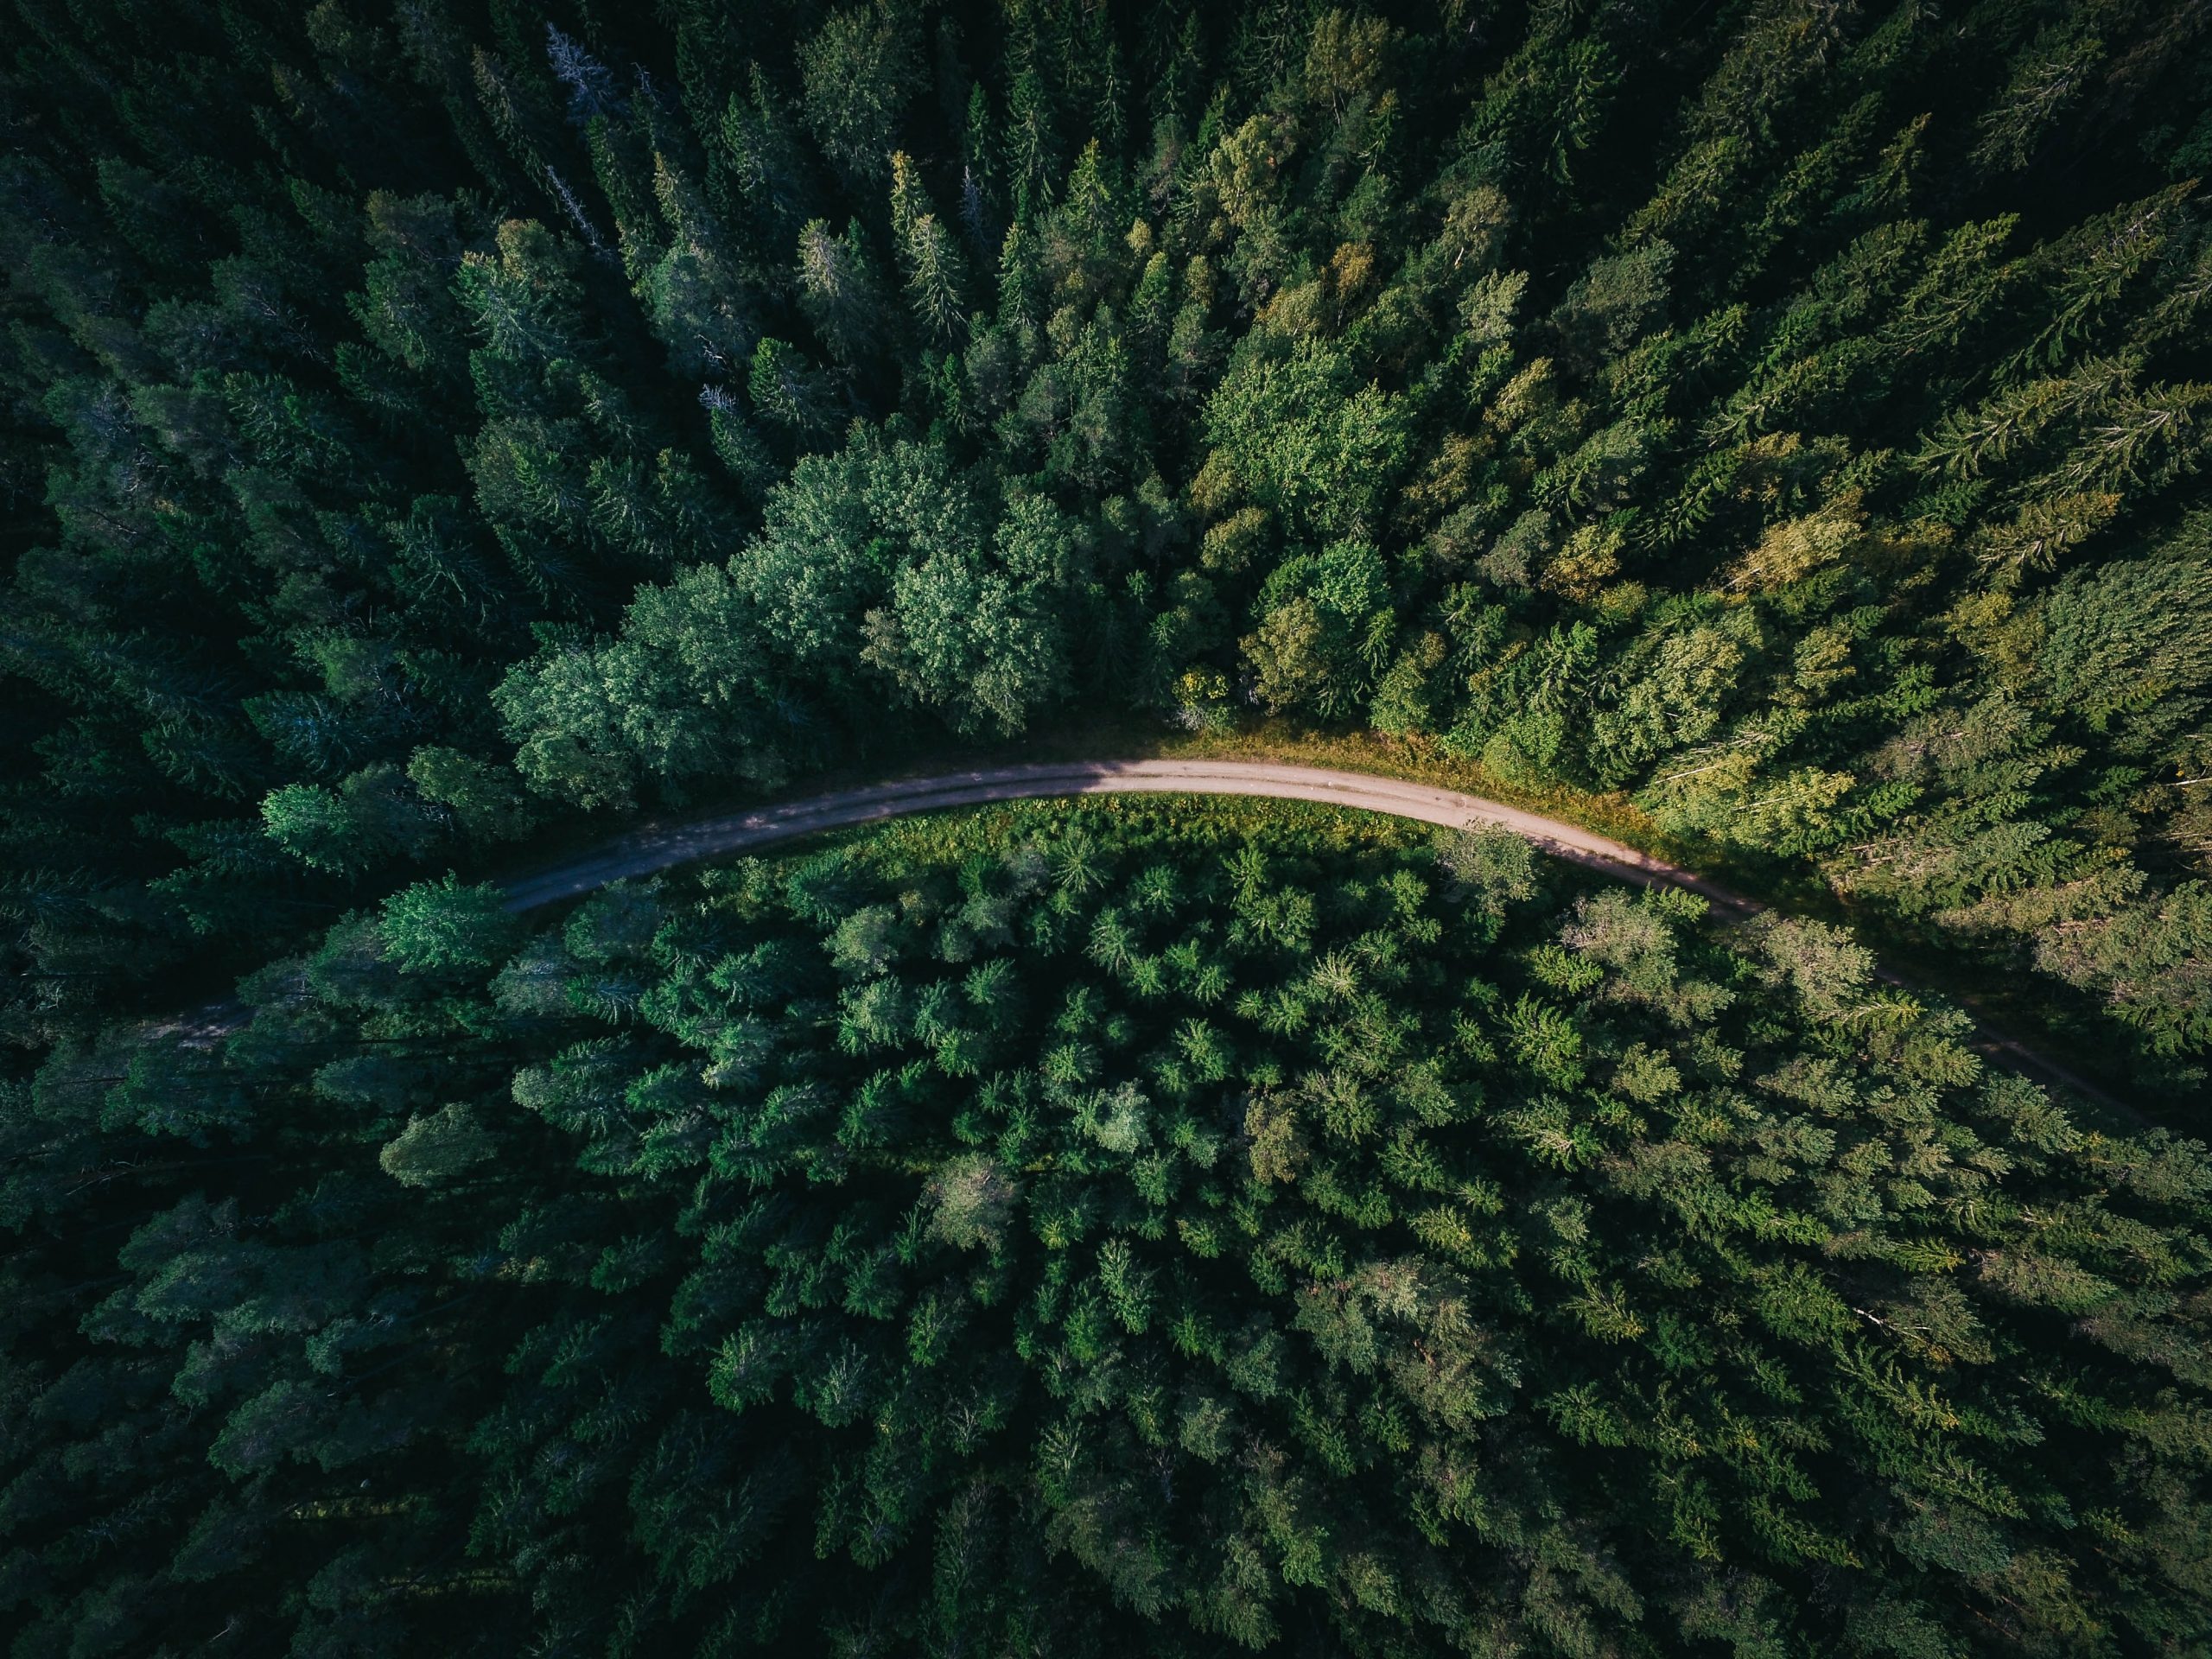 ariel-view-of-single-road-through-forest